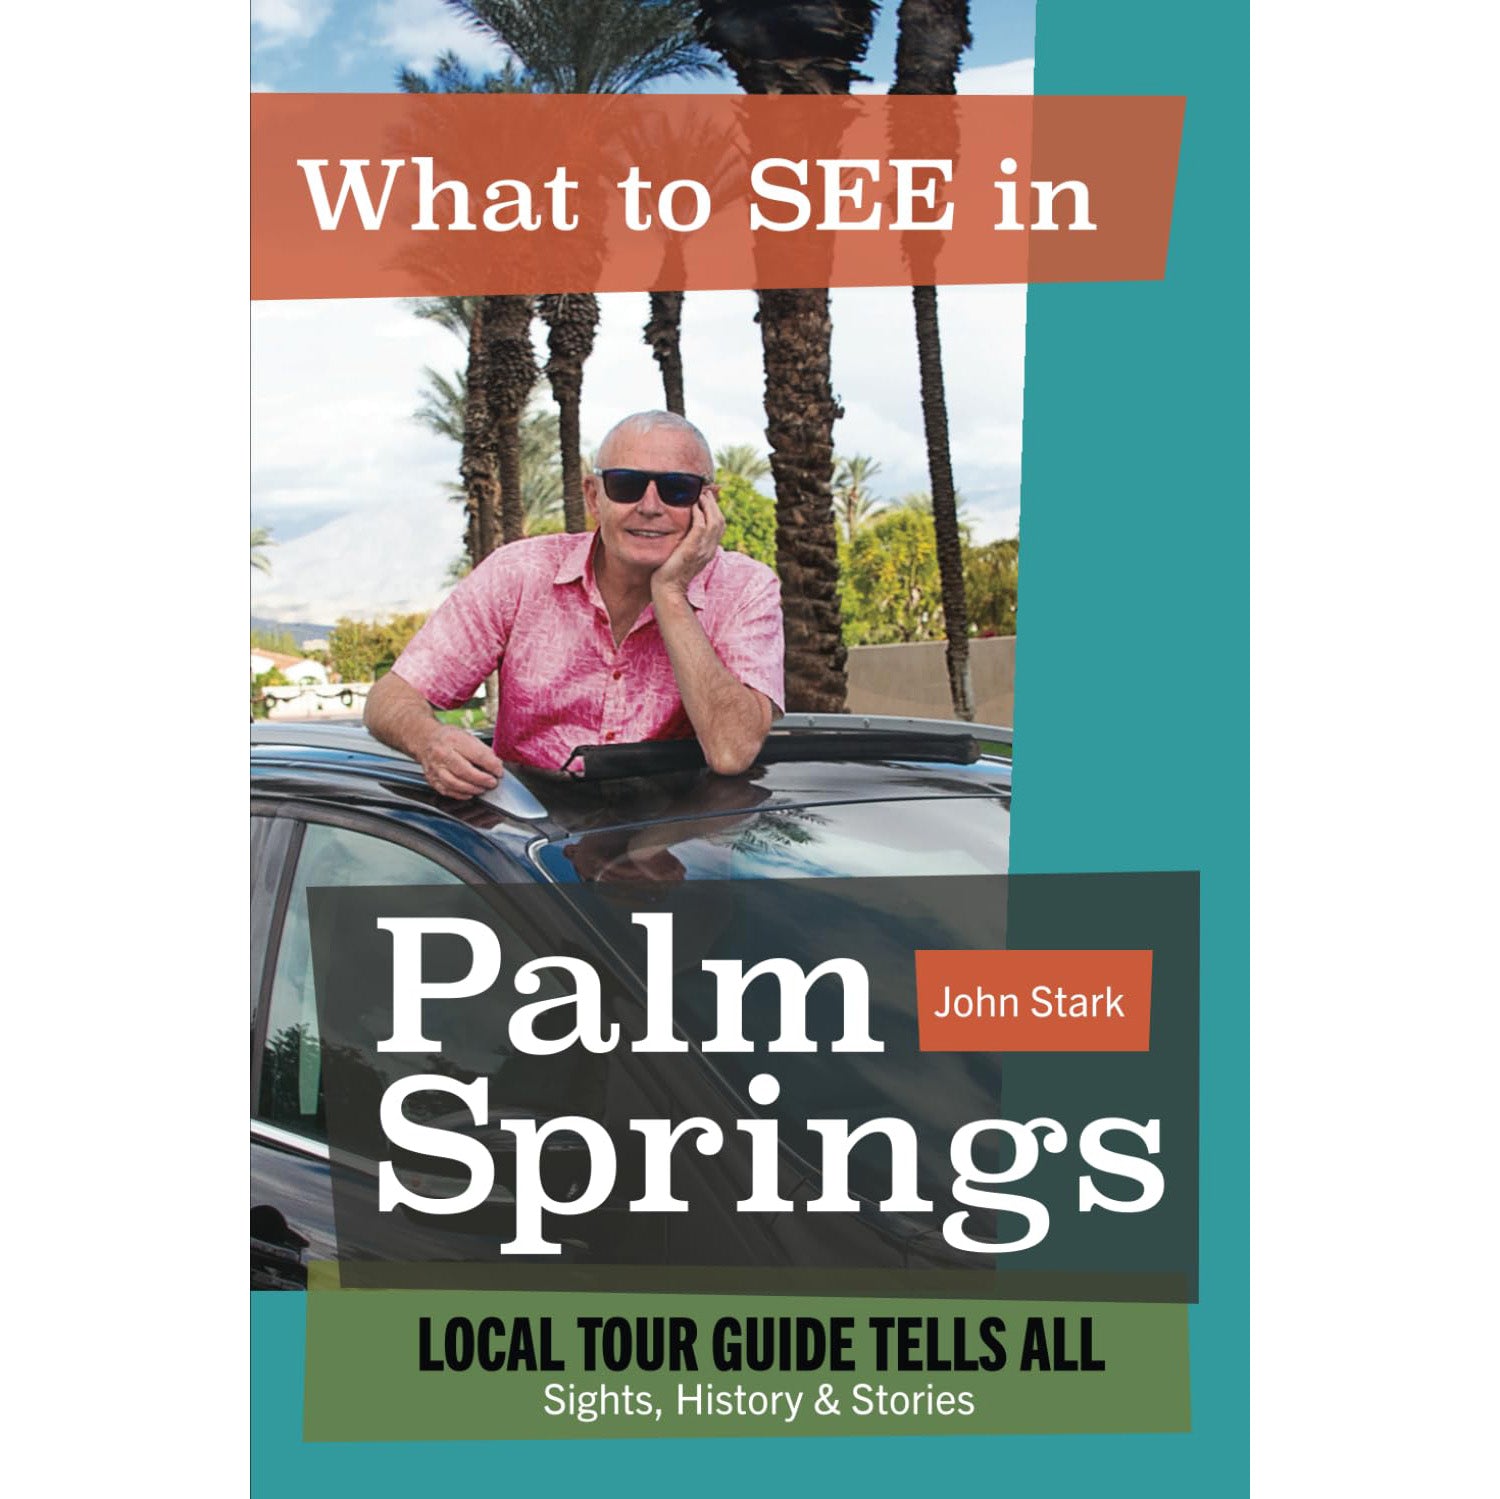 What to See in Palm Springs: Local Tour Guide Tells All